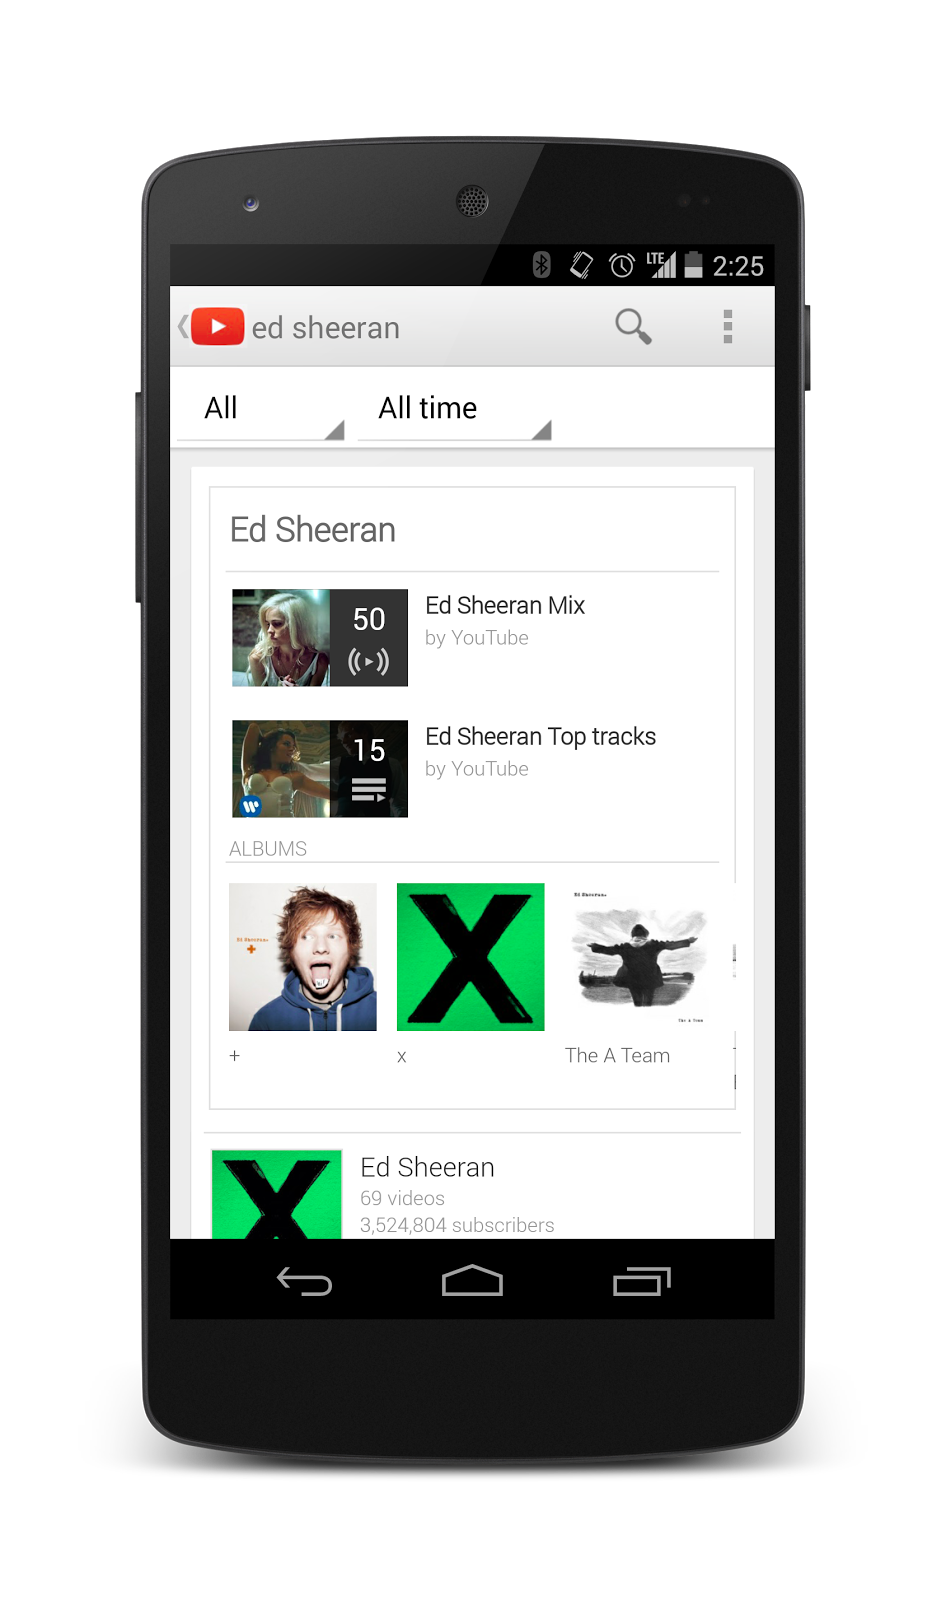 YouTube Music Key launched in UK, US and 4 more countries with free six-month trial for ad-free, offline music mode. Offers complete access to Google’s Play Music library and vice versa